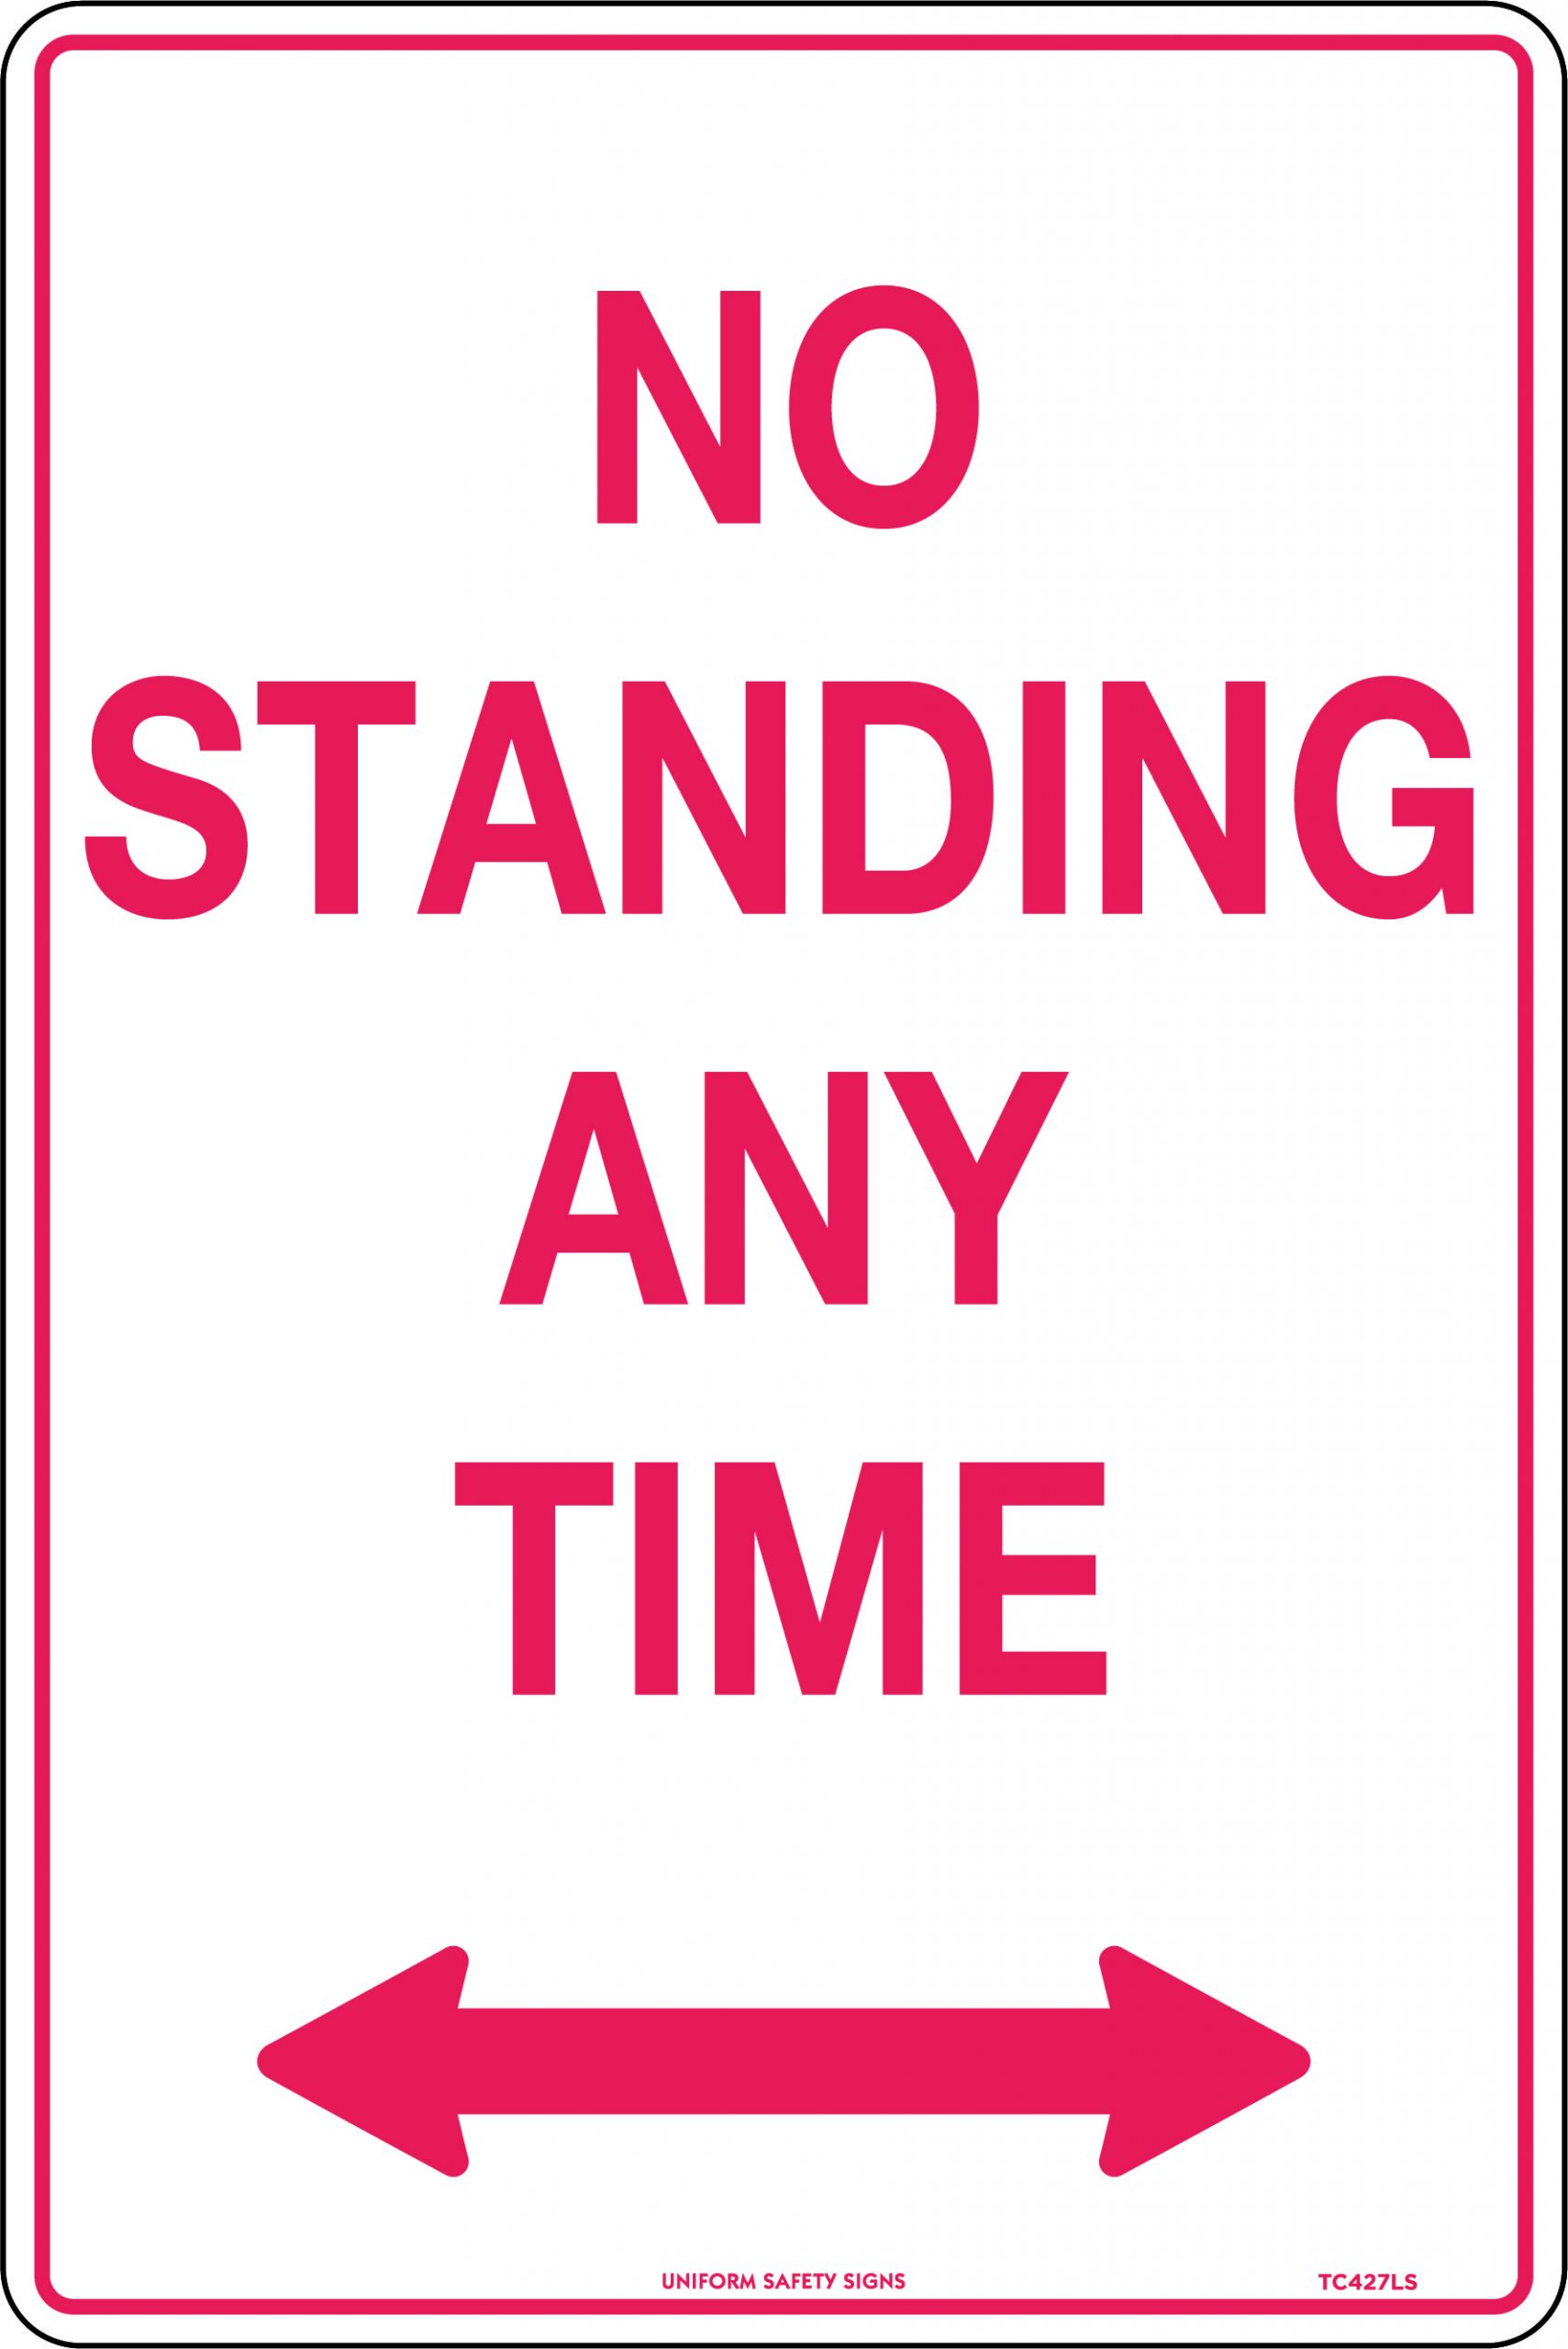 SIGN 450 X 300MM CLASS 2 METAL NO STANDING ANY TIME ( DOUBLE ARROWS)